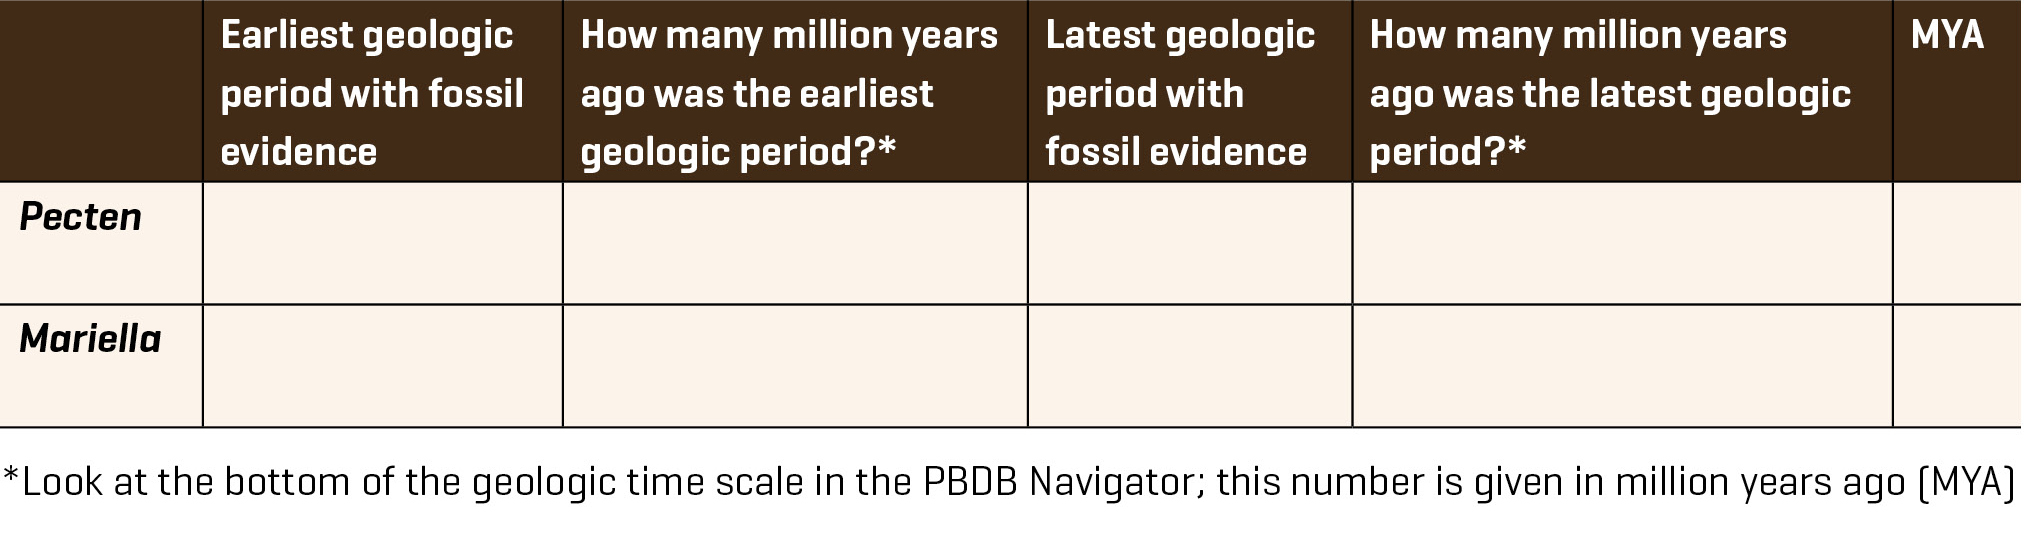 Student data table for calculating the time range of Pecten and Mariella fossils. Modified from the Life through Time lesson linked on the PBDB (George 2017).